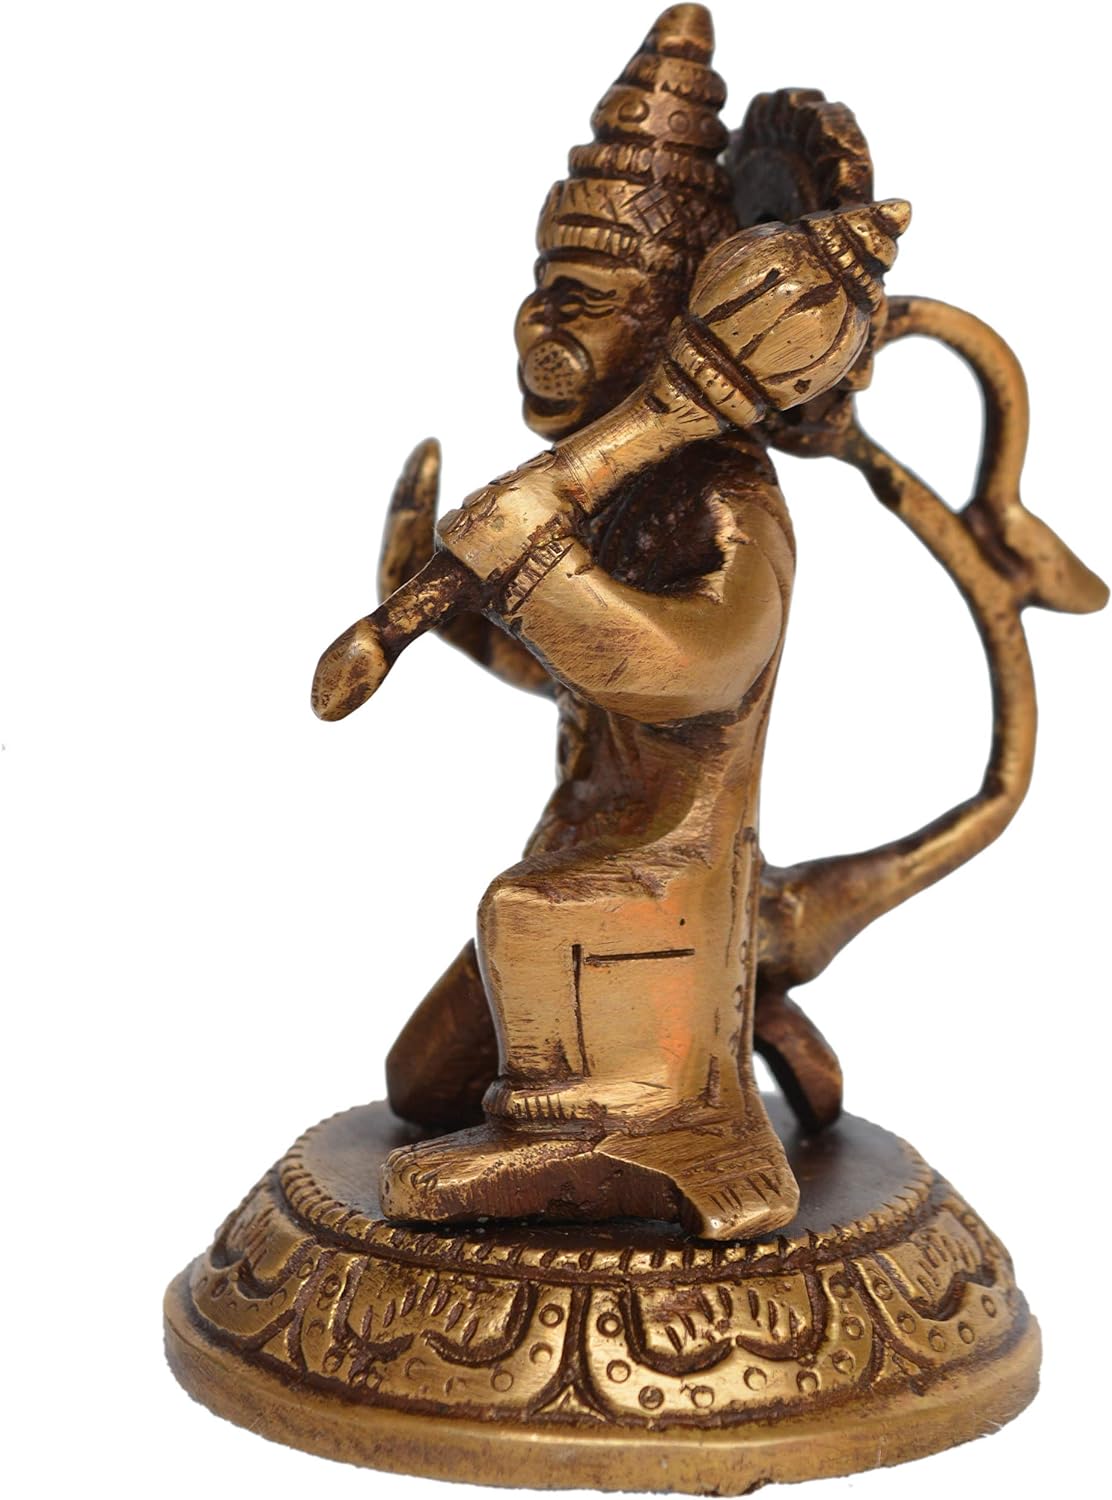 Aakrati Antique Finished Vintage Sitting Hanuman Idol with Trumpet Showpiece - Religious Hindu Lord Statue for woship